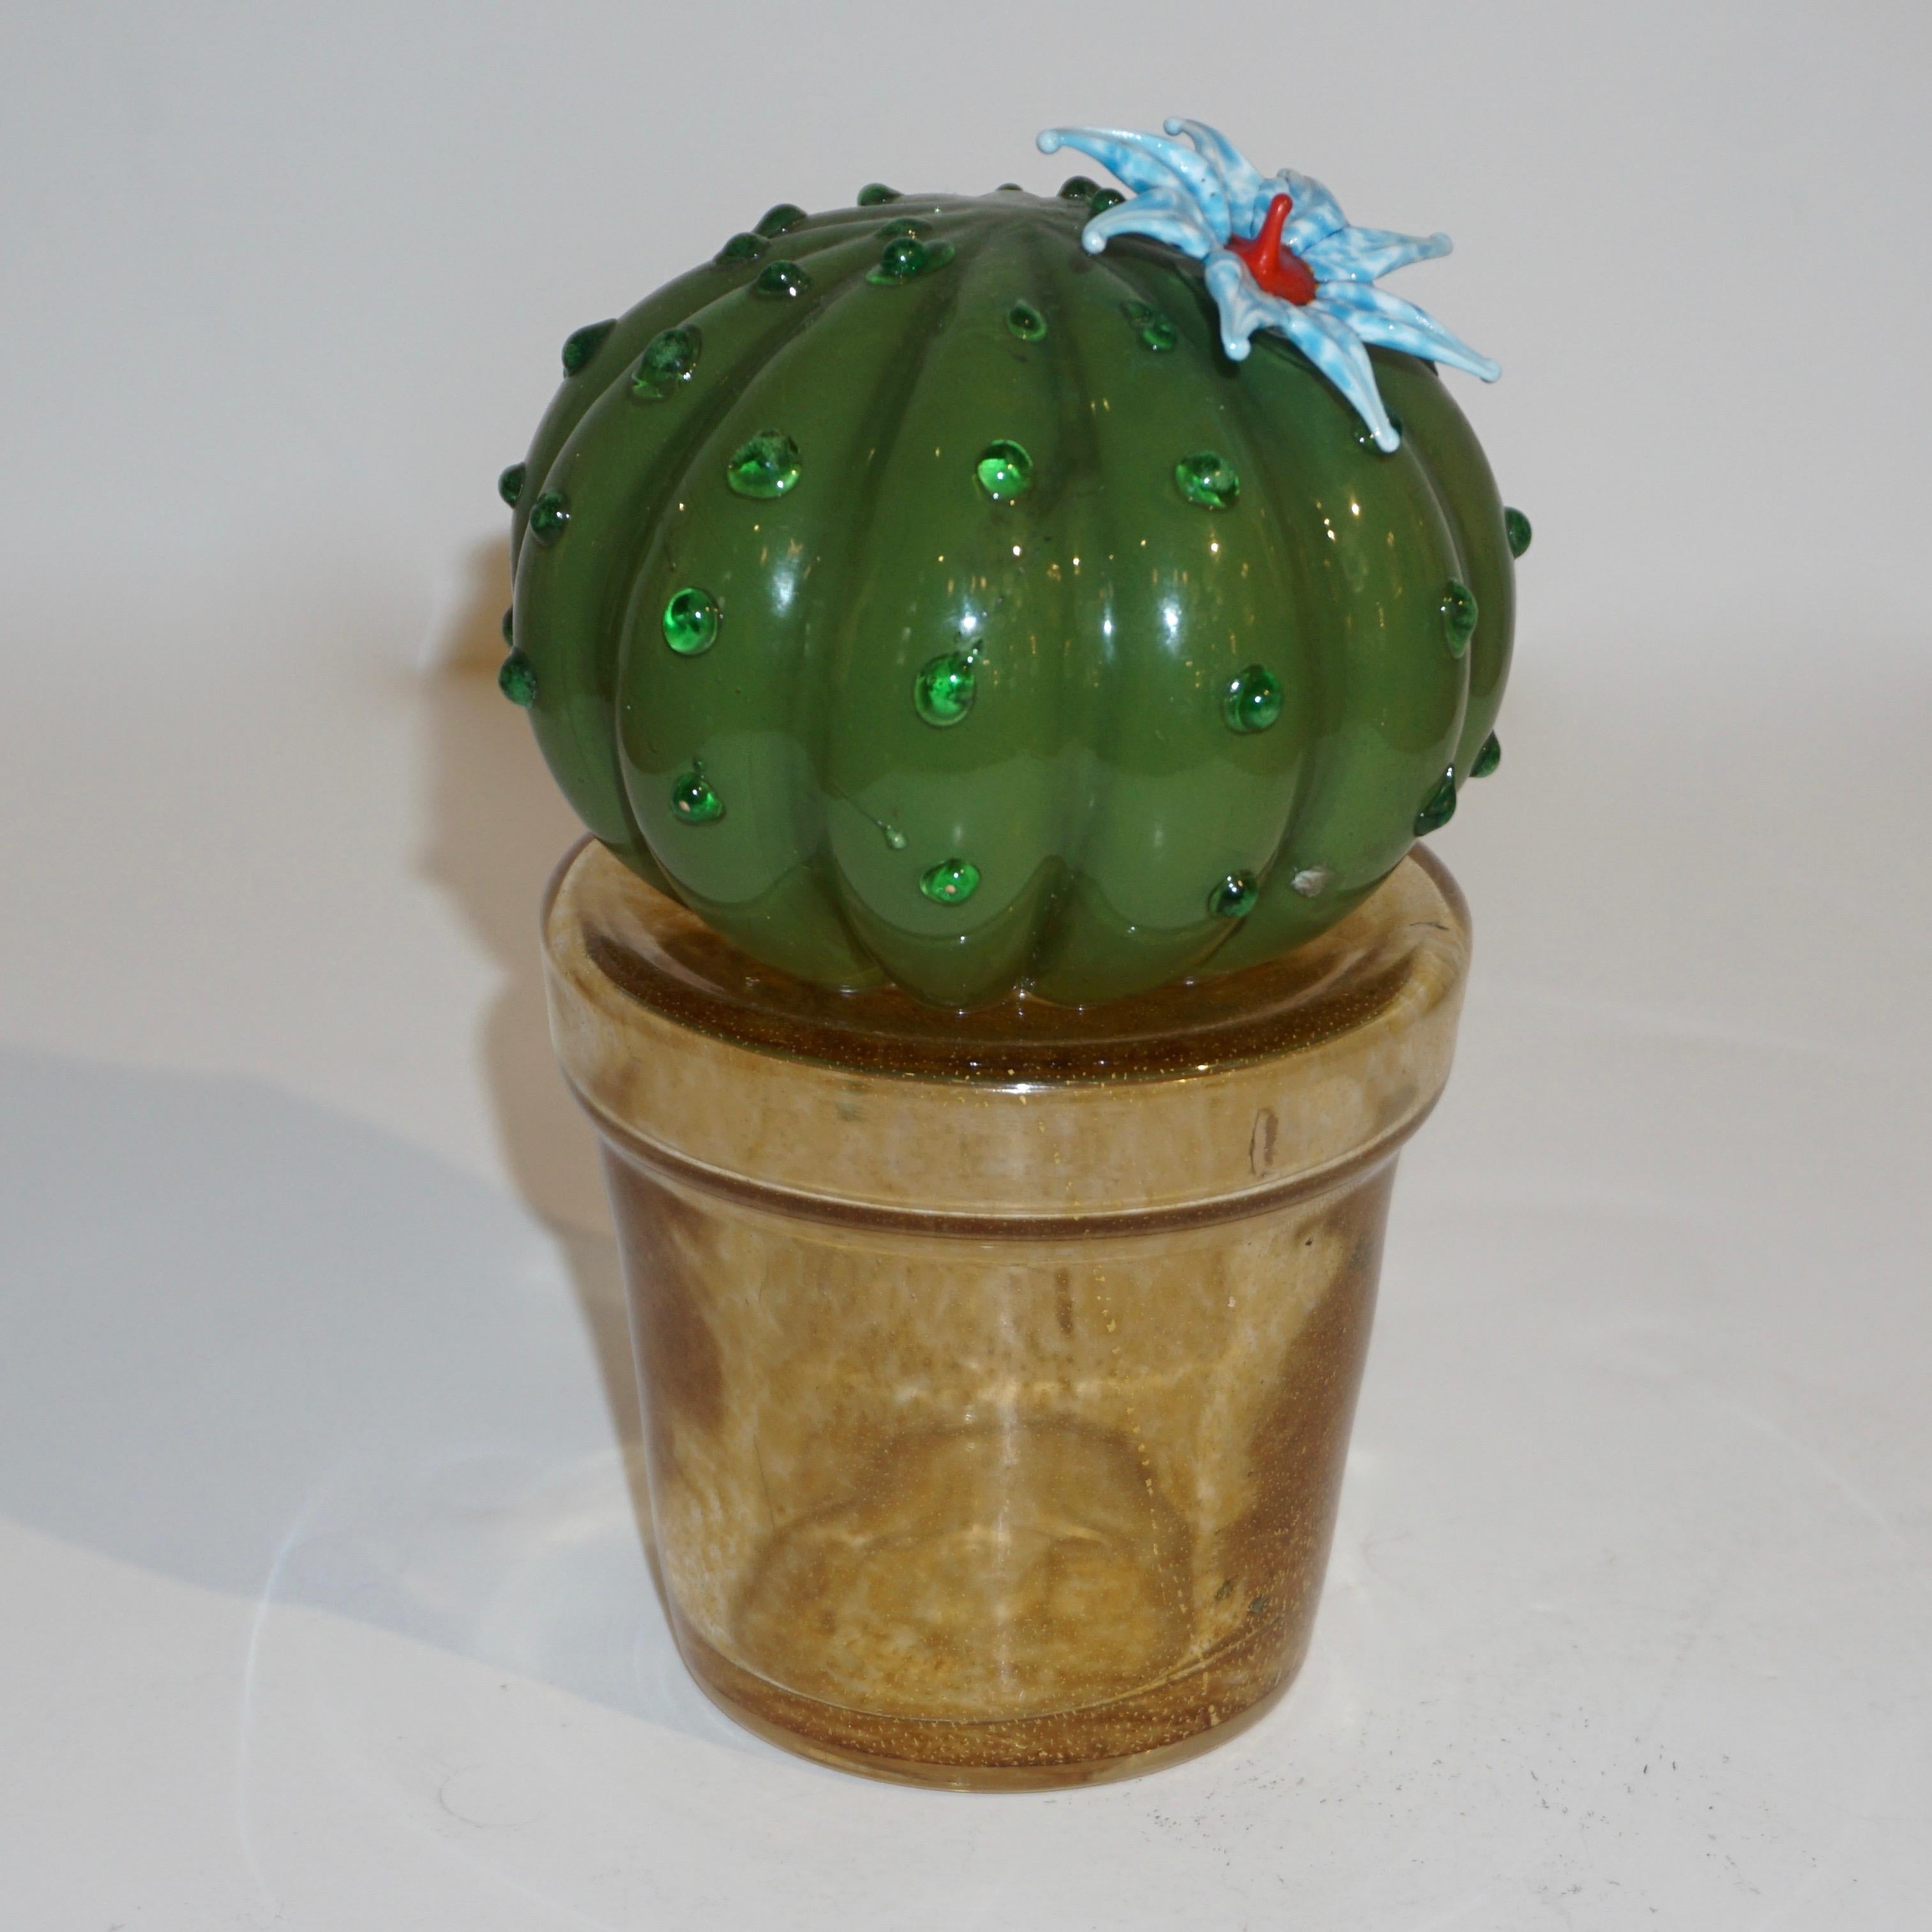 Organic Modern 1990s Vintage Italian Green Murano Glass Small Cactus Plant with Blue Flower